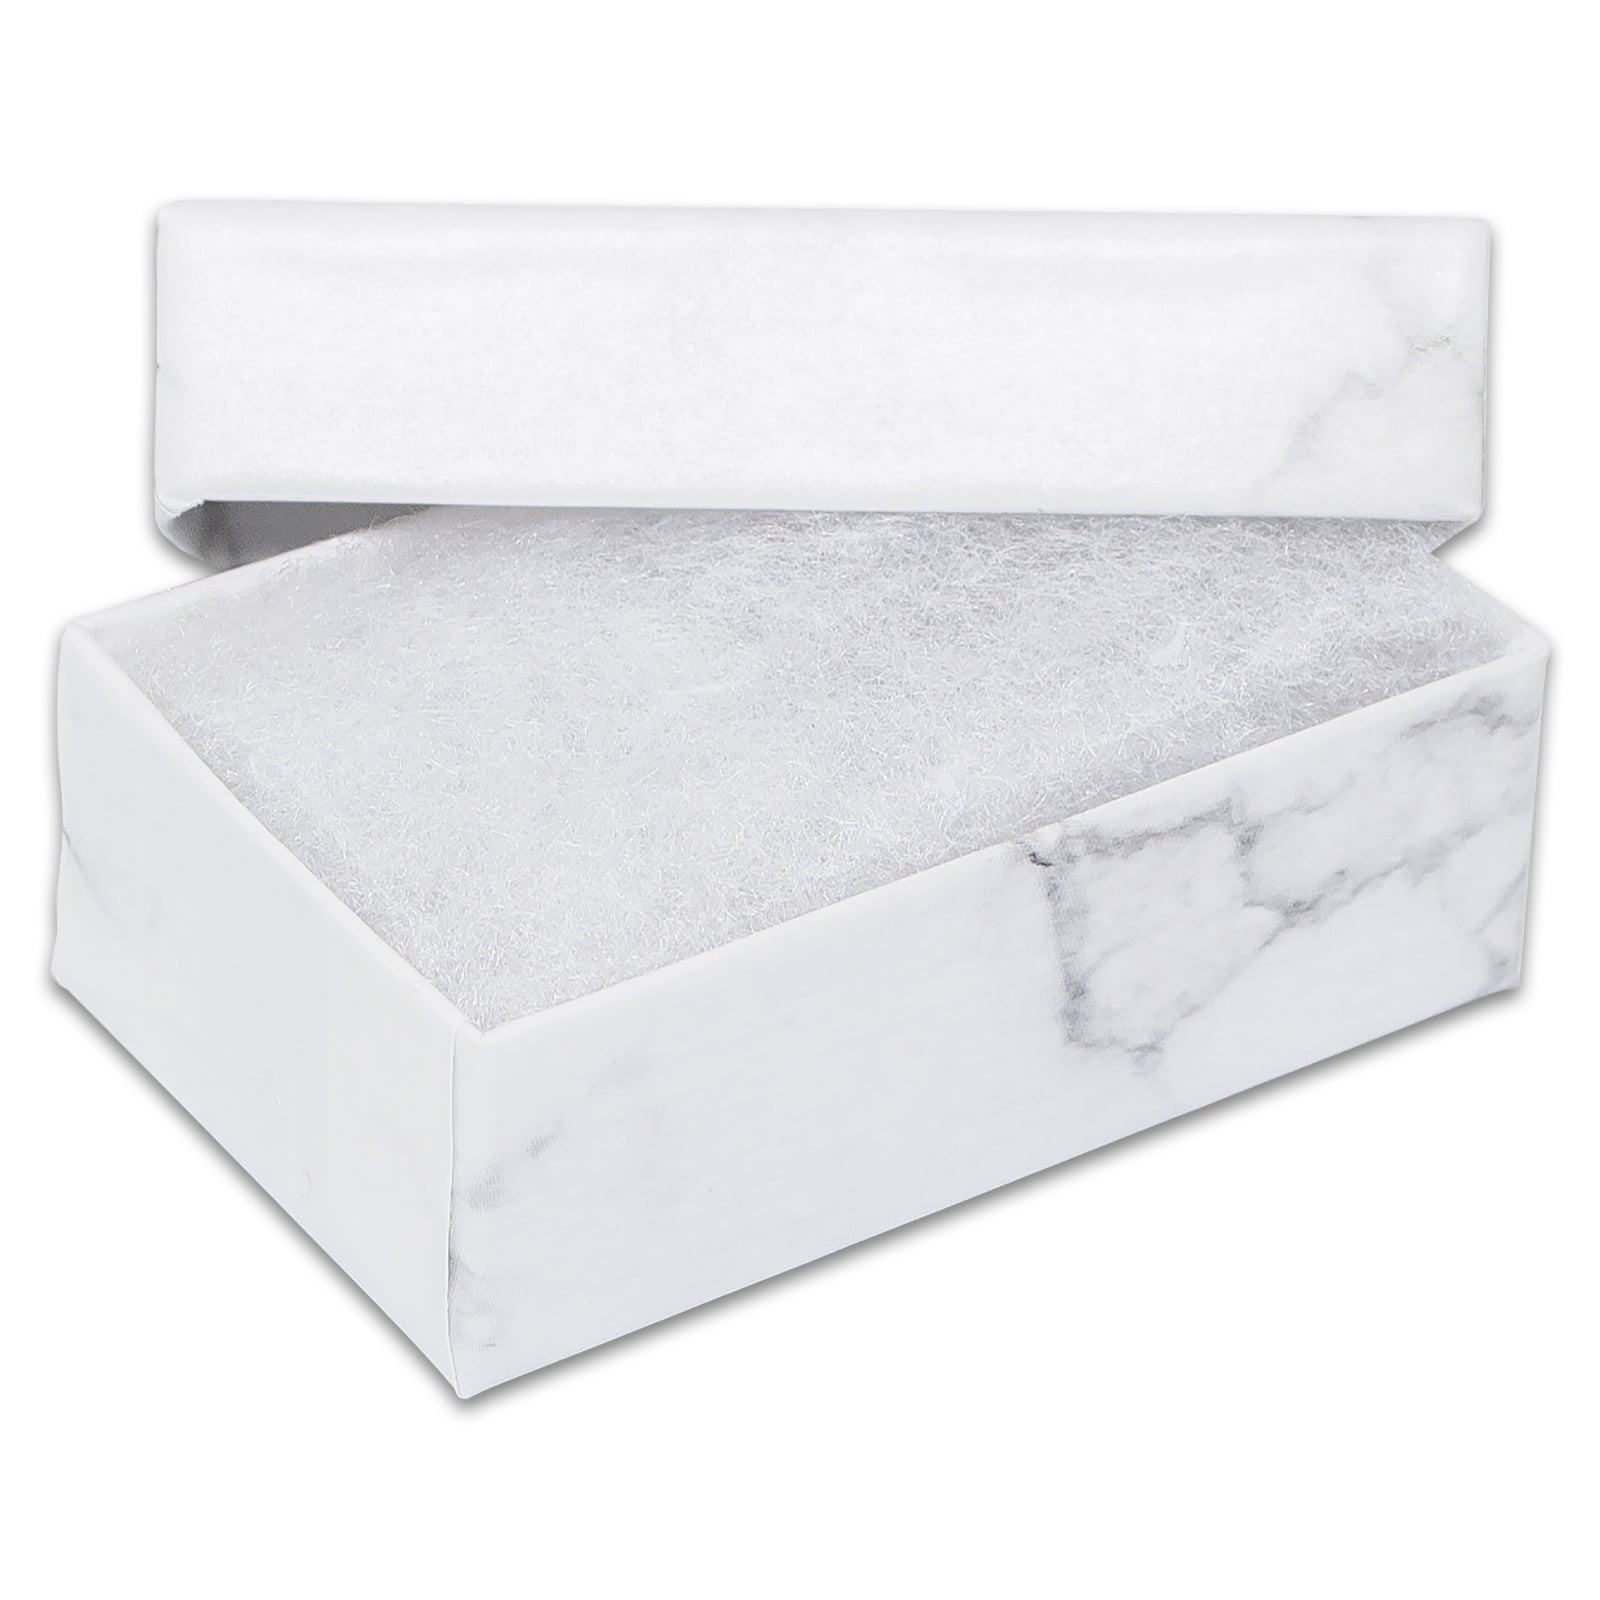 White size #33 by Jewelers Supermarket 3.5 x 3.5x 1 100 Cotton Filled Boxes Size 33 